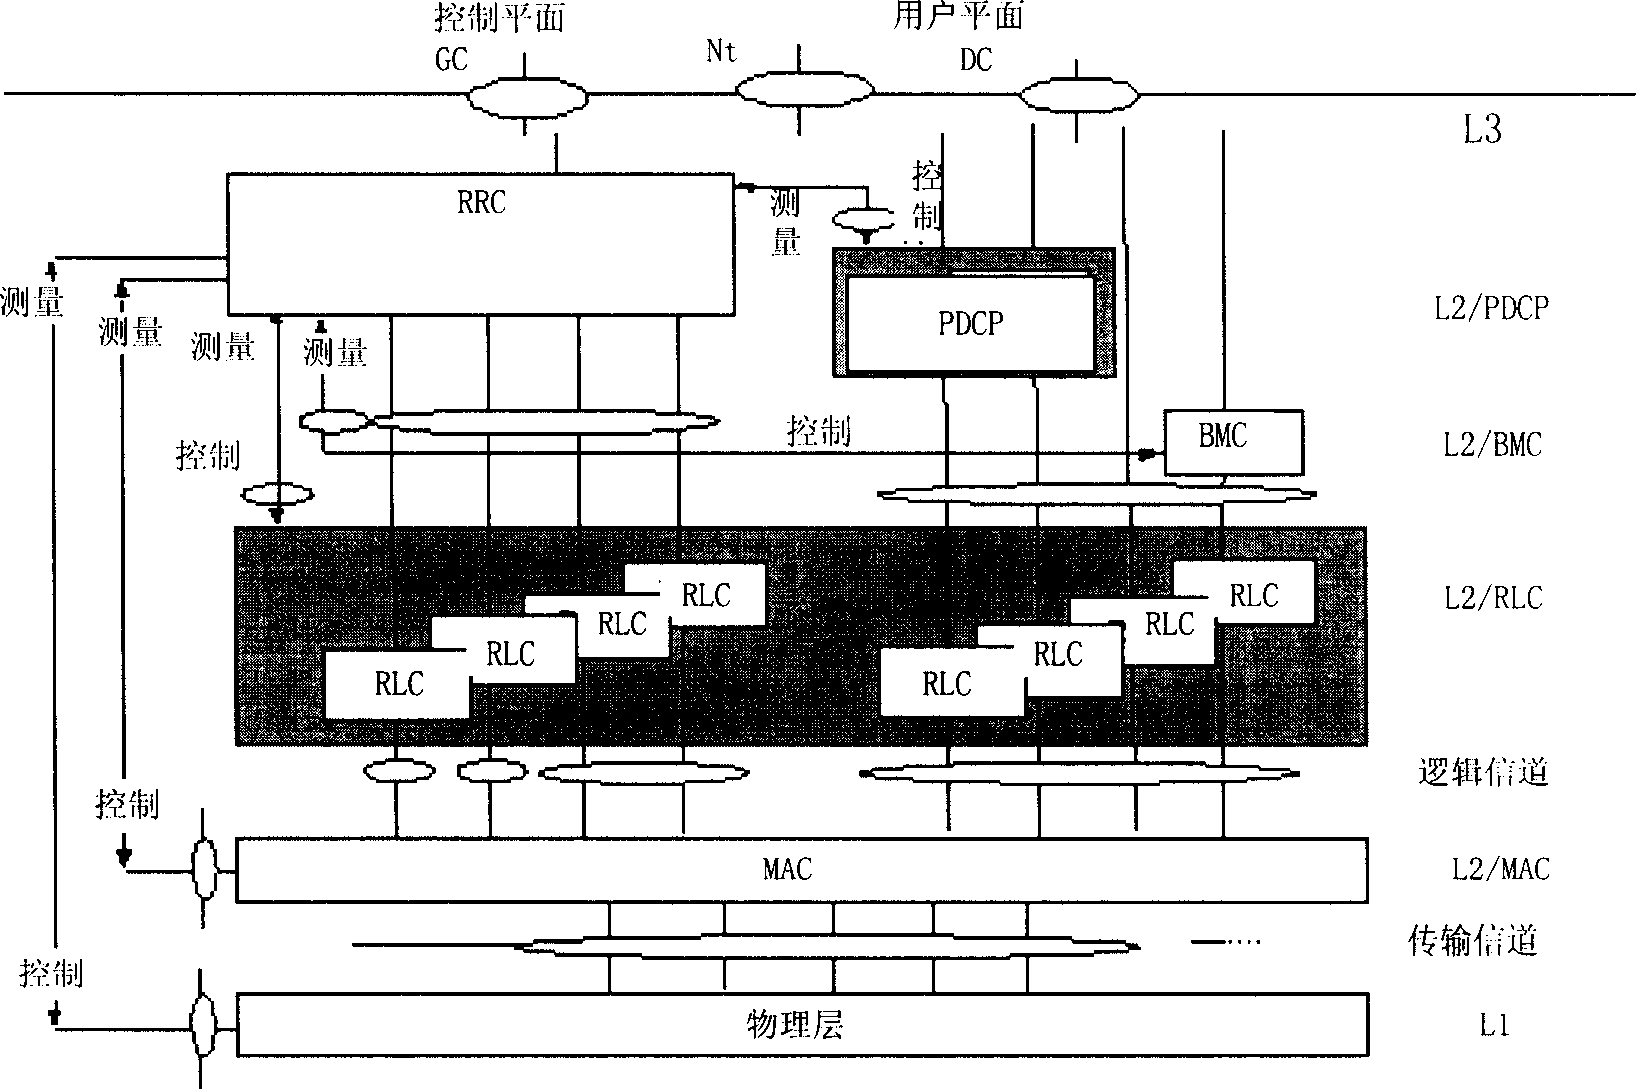 Method and apparatus for controlling enhanced uplink special physical channel power